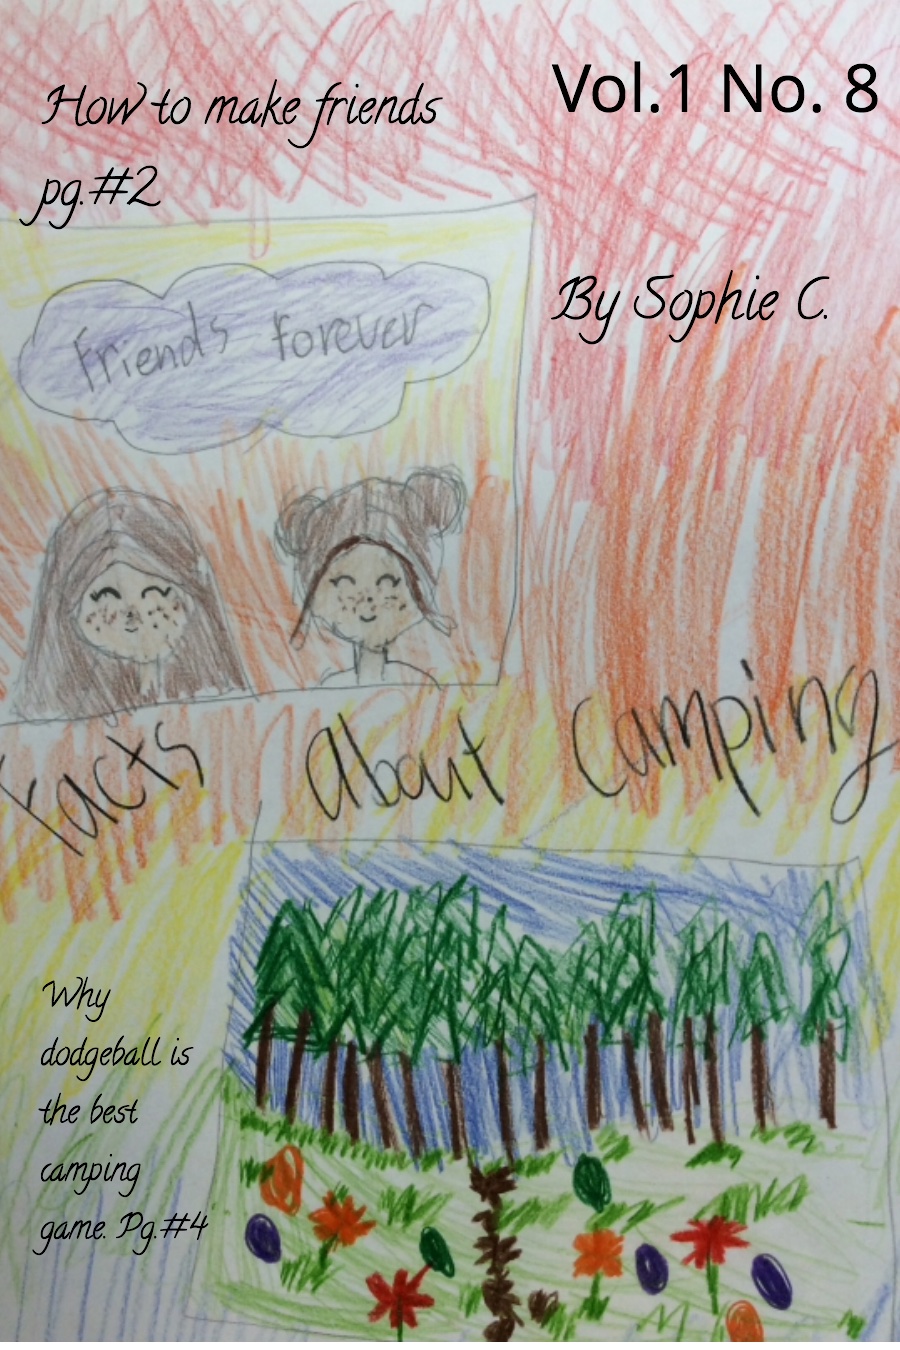 Facts About Camping by Sophie C